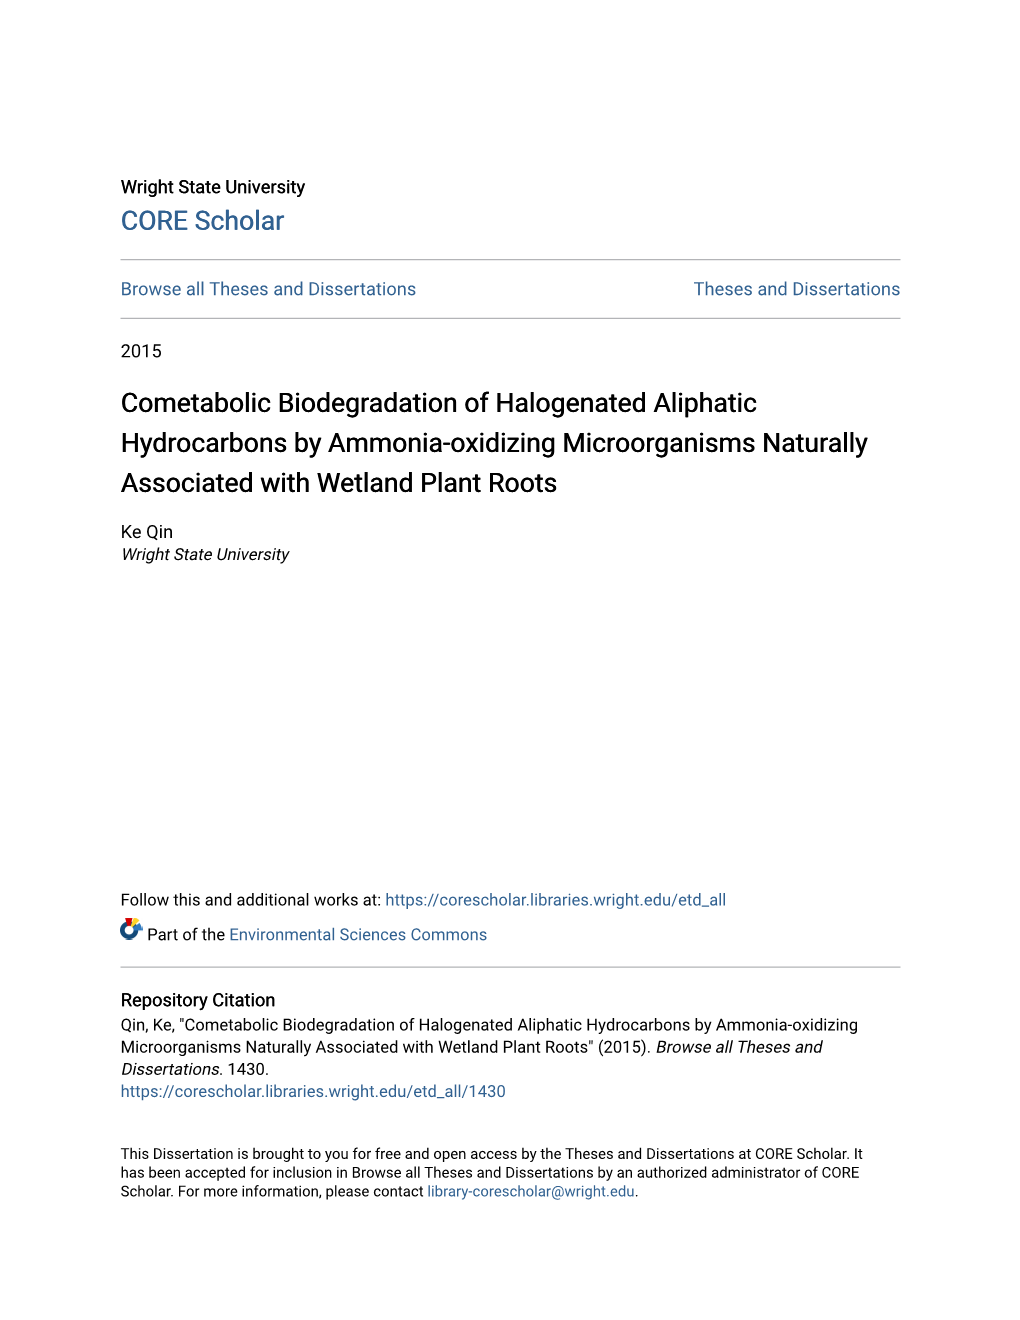 Cometabolic Biodegradation of Halogenated Aliphatic Hydrocarbons by Ammonia-Oxidizing Microorganisms Naturally Associated with Wetland Plant Roots